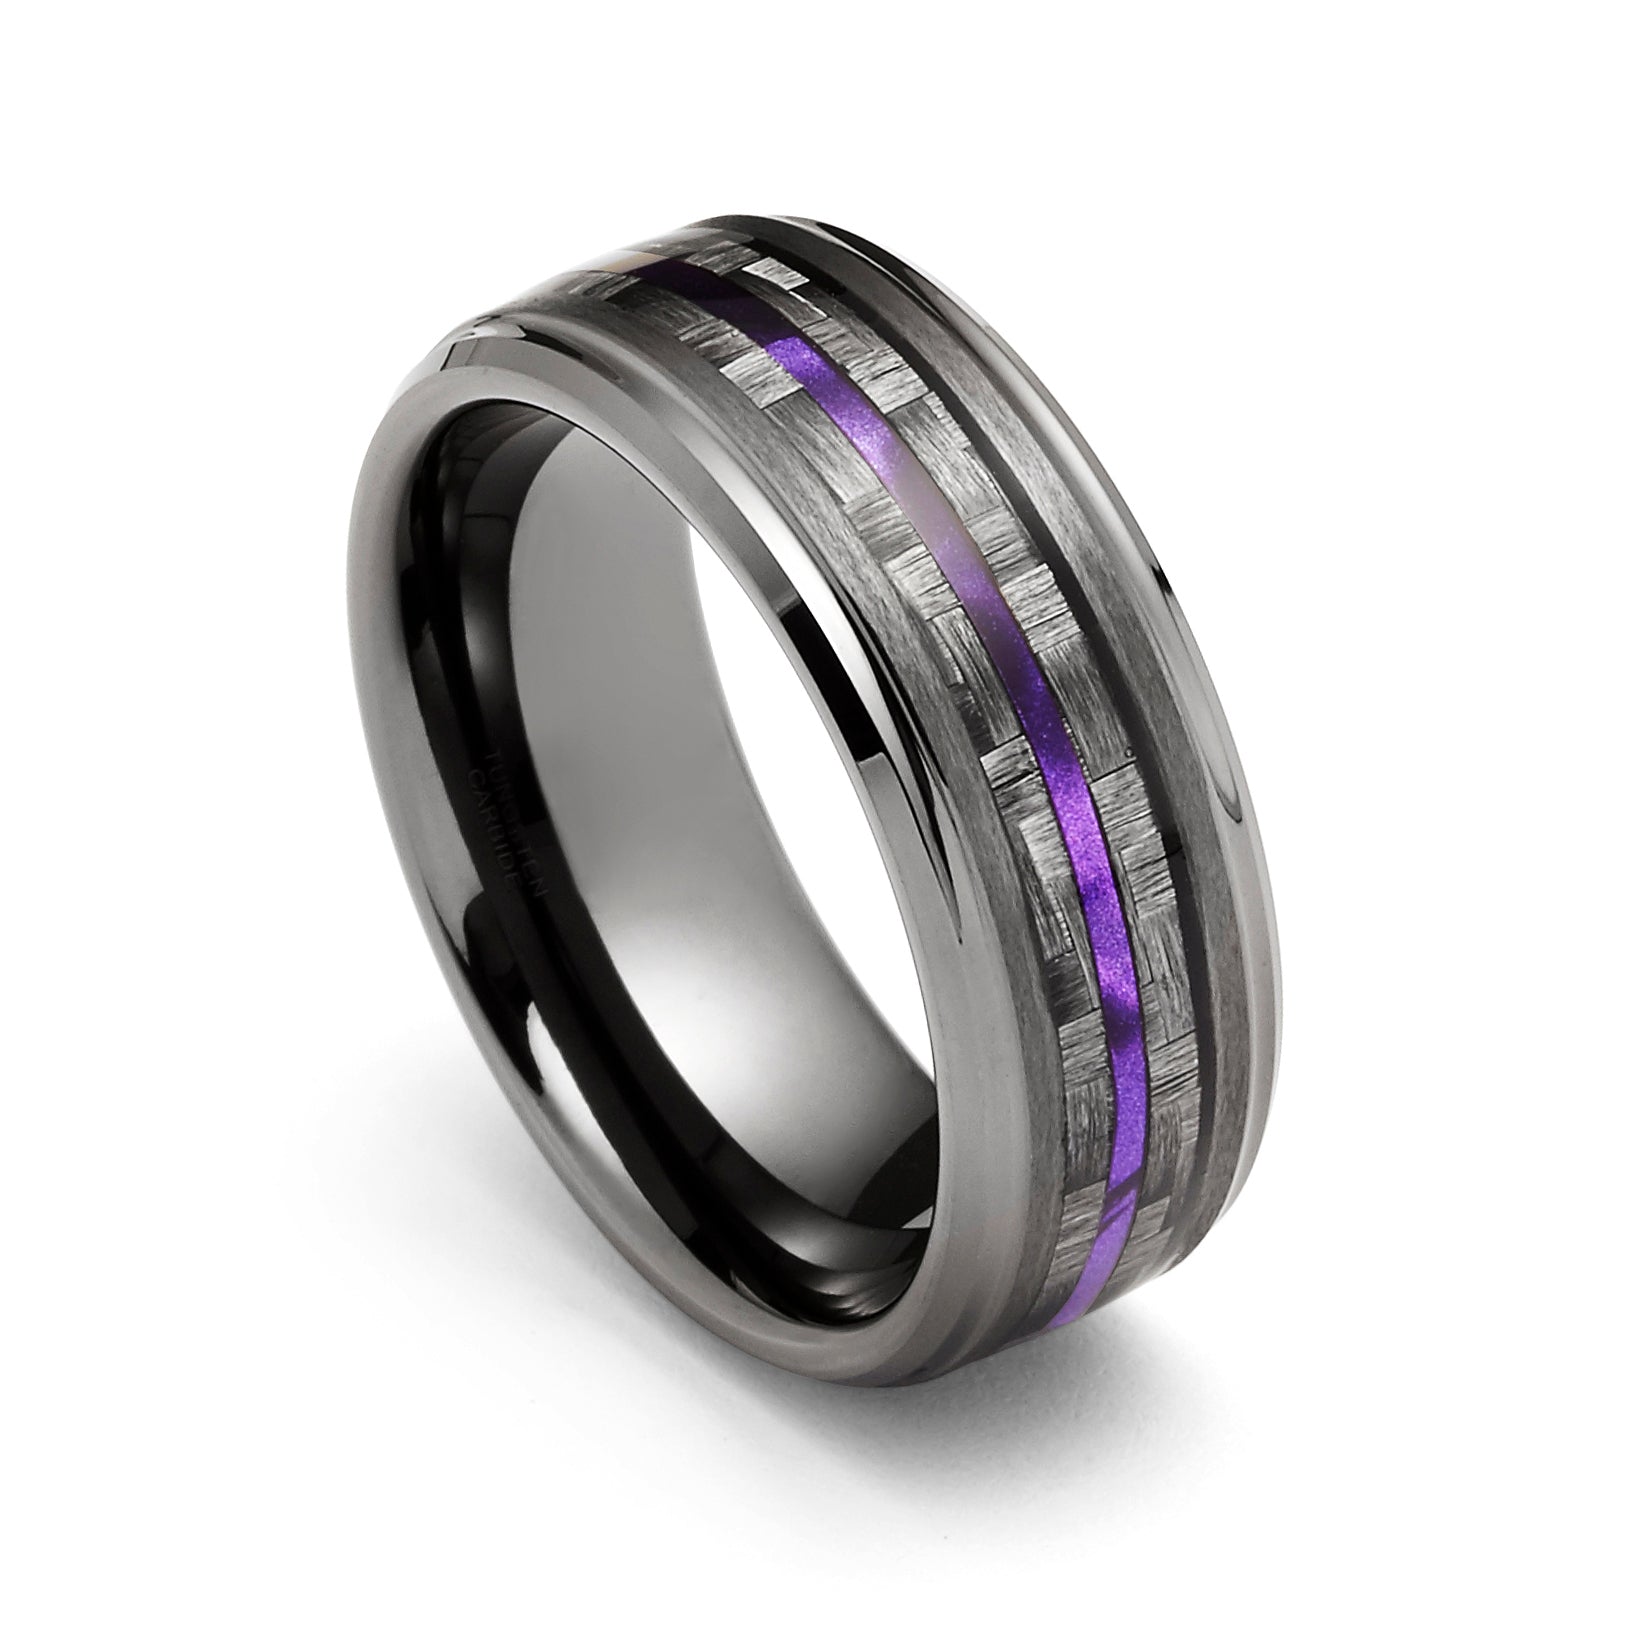 His and Hers Matching Couple Rings,Black Gold Filled Womens Promise Wedding  Ring Set Purple Cubic Zirconia Cz,8mm Titanium Steel Mens Classics Wedding  Bands Size 12 | Amazon.com